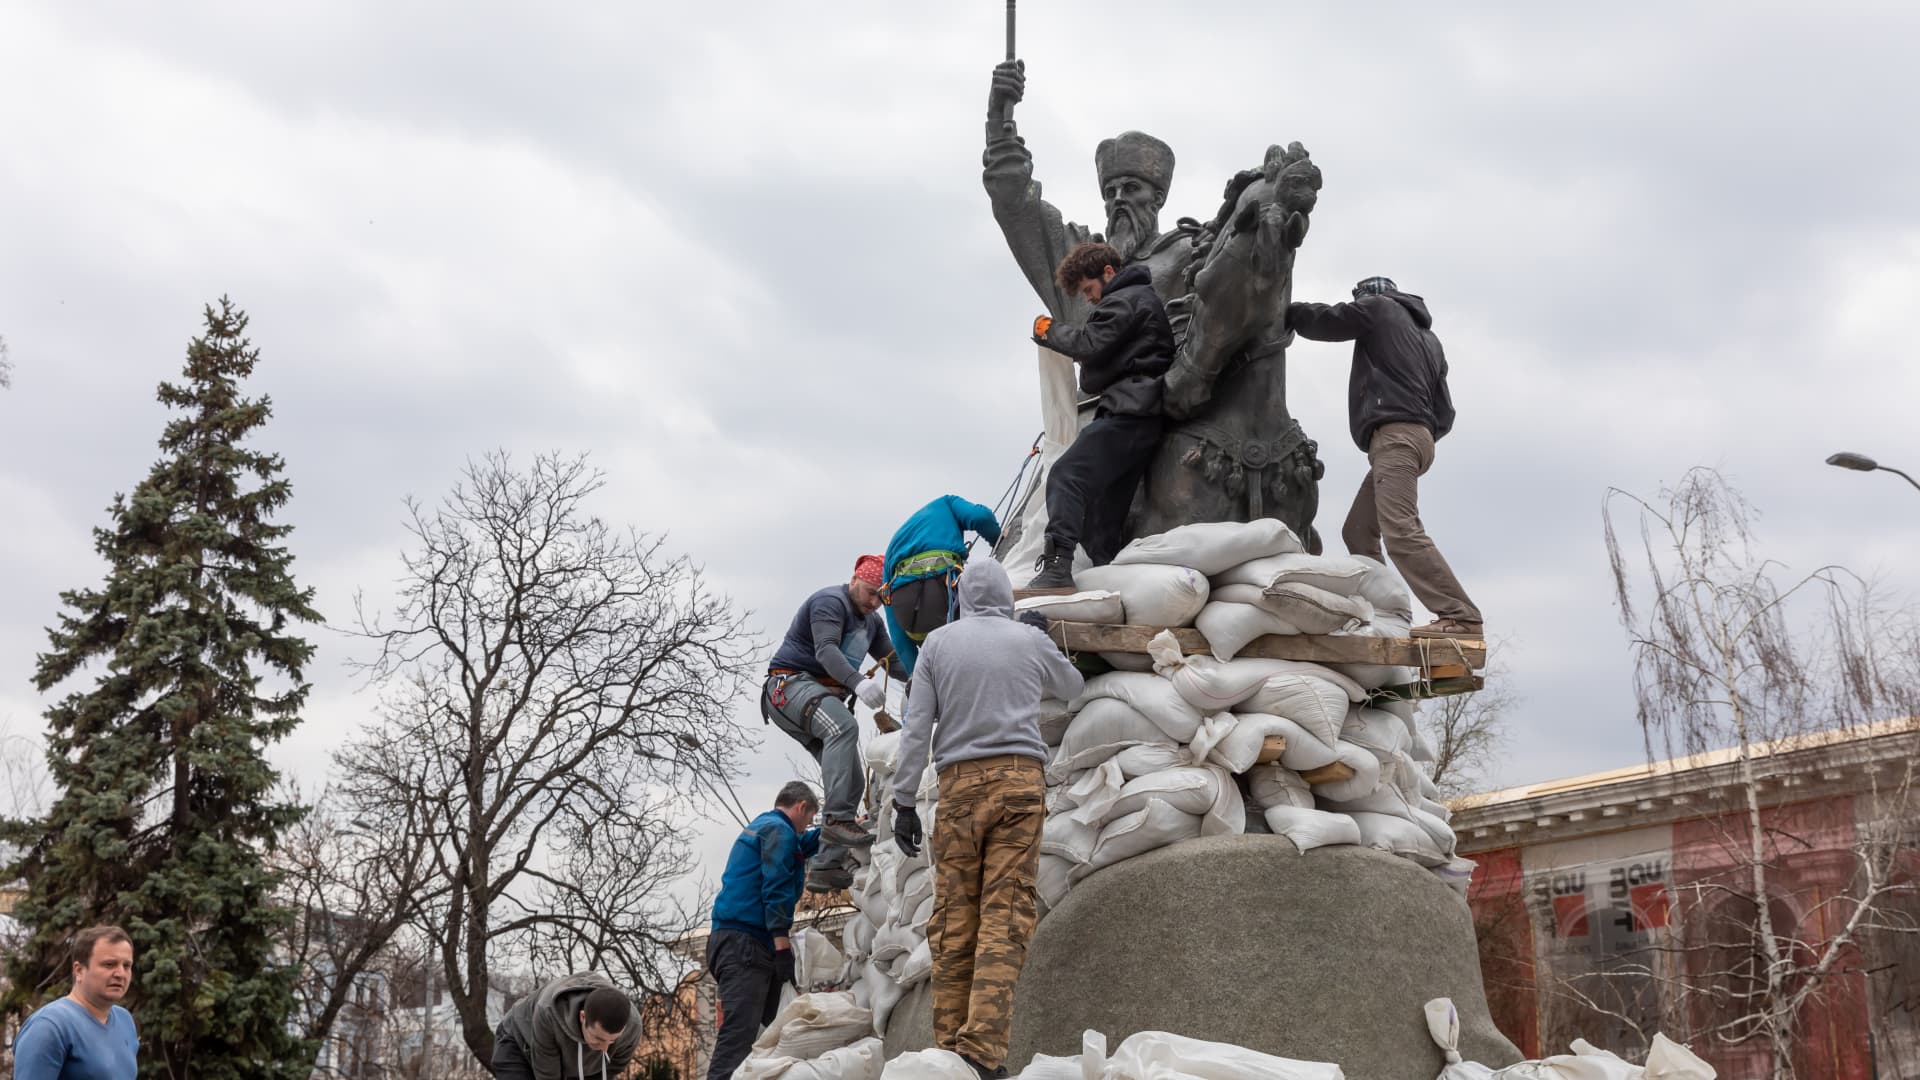 A group of young people cover the monument of Hetman Sahaidachny with sandbags in fear of a possible bombardment as Russian forces continue their full-scale invasion of Ukraine. Russia invaded Ukraine on 24 February 2022, triggering the largest military attack in Europe since World War II.